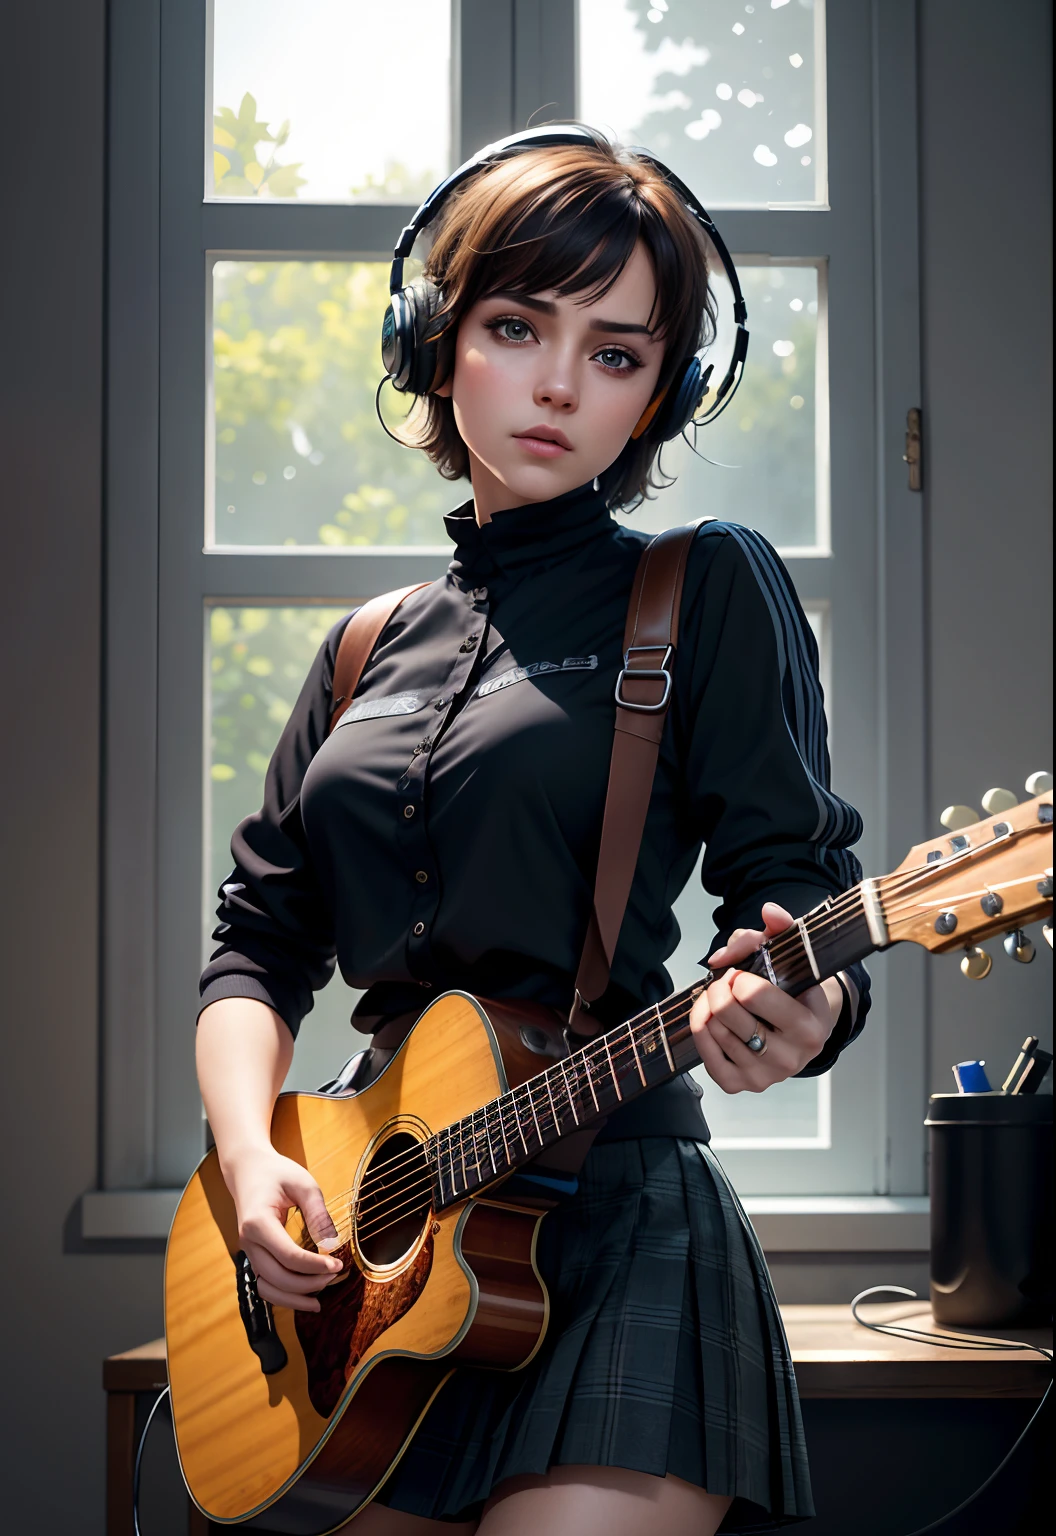 highres, shadows, absurdres, best_quality, ultra_detailed, 8k, extremely_clear, photograph, beautiful, sharp focus, hdr,
A cute pop singer with short hair and symmetrical teary eyes holds a guitar and sings into headphones, wearing a pleated skirt, with a dynamic angle, captured in a high-detailed cowboy shot, exuding a melancholy emotion, featuring soothing tones and a contrasting mix of light and shadow, all while emphasizing the subject's hair, eyes, mouth, and action in a composition that is both pleasing to the eye and thought-provoking.